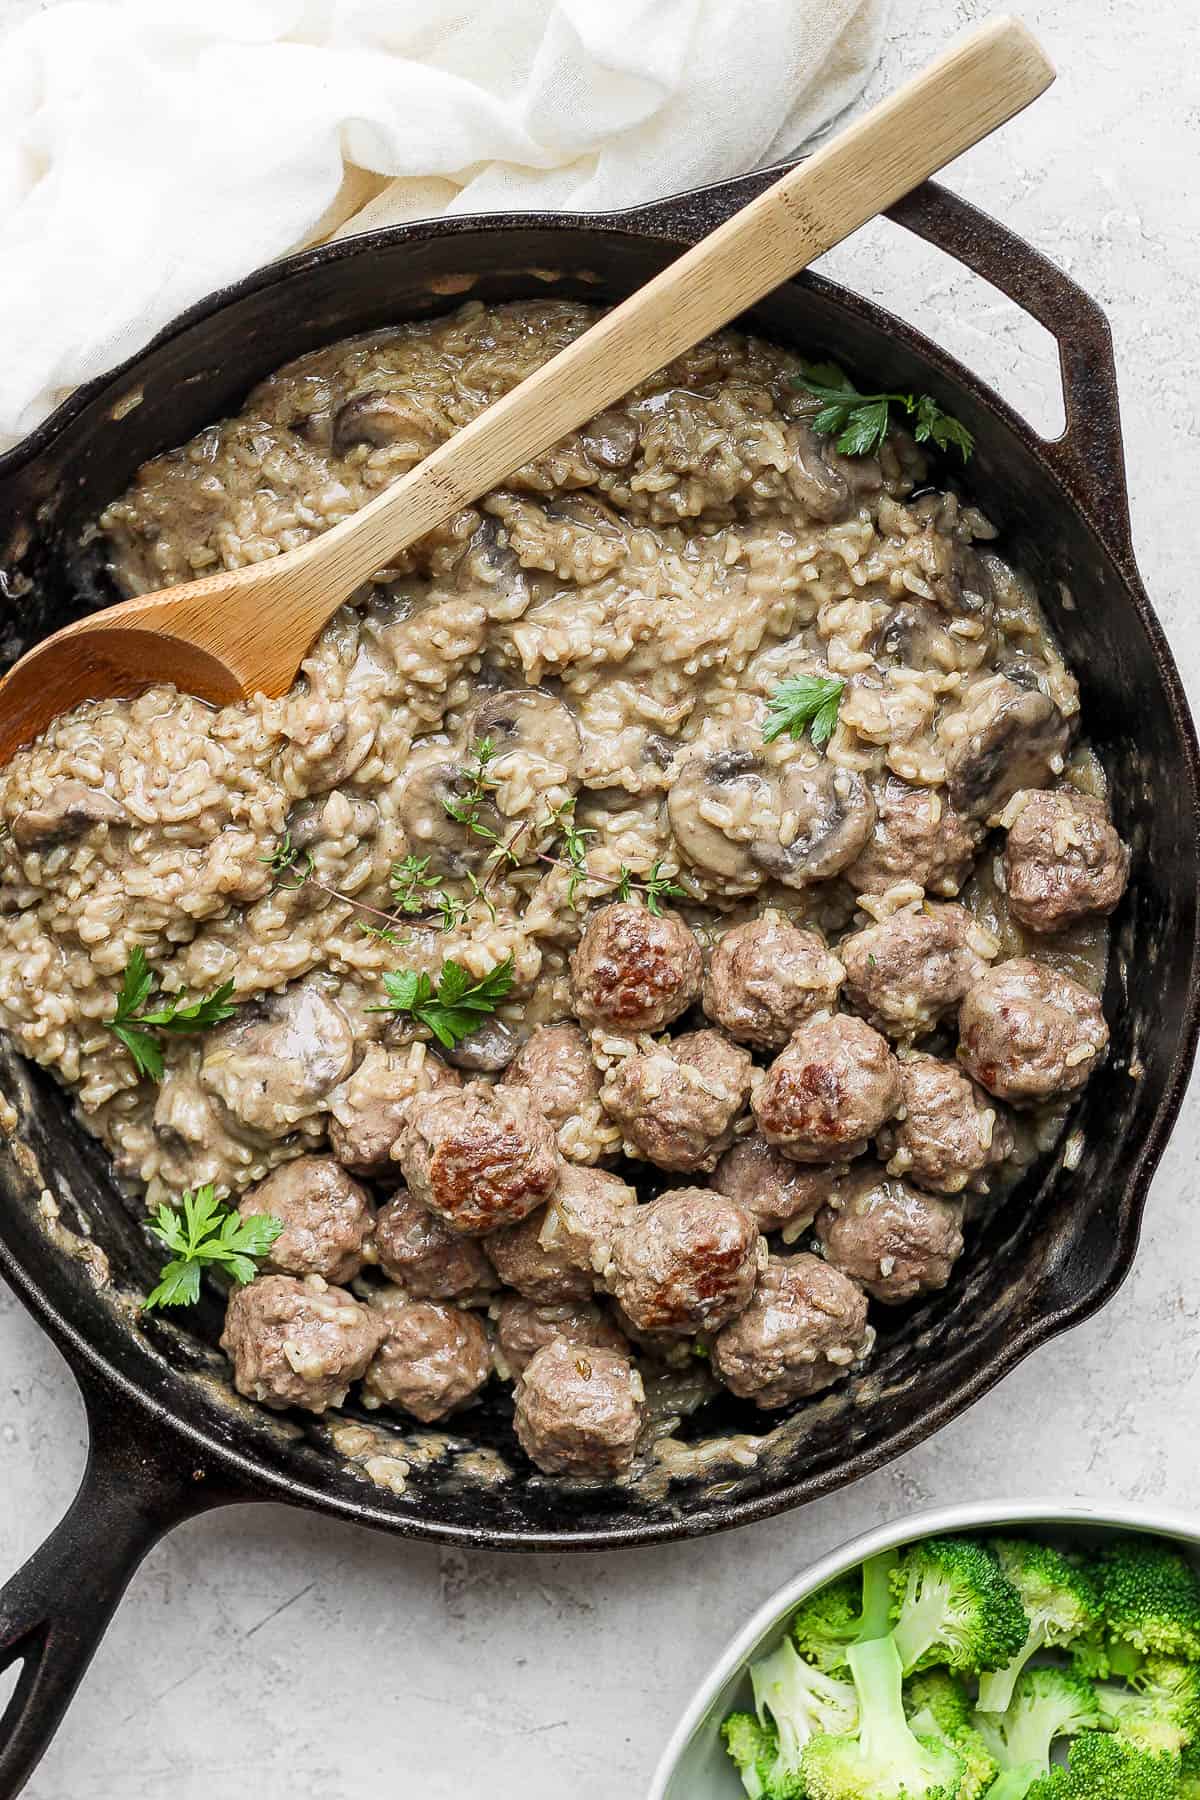 Meatballs and rice in a cast iron skillet.